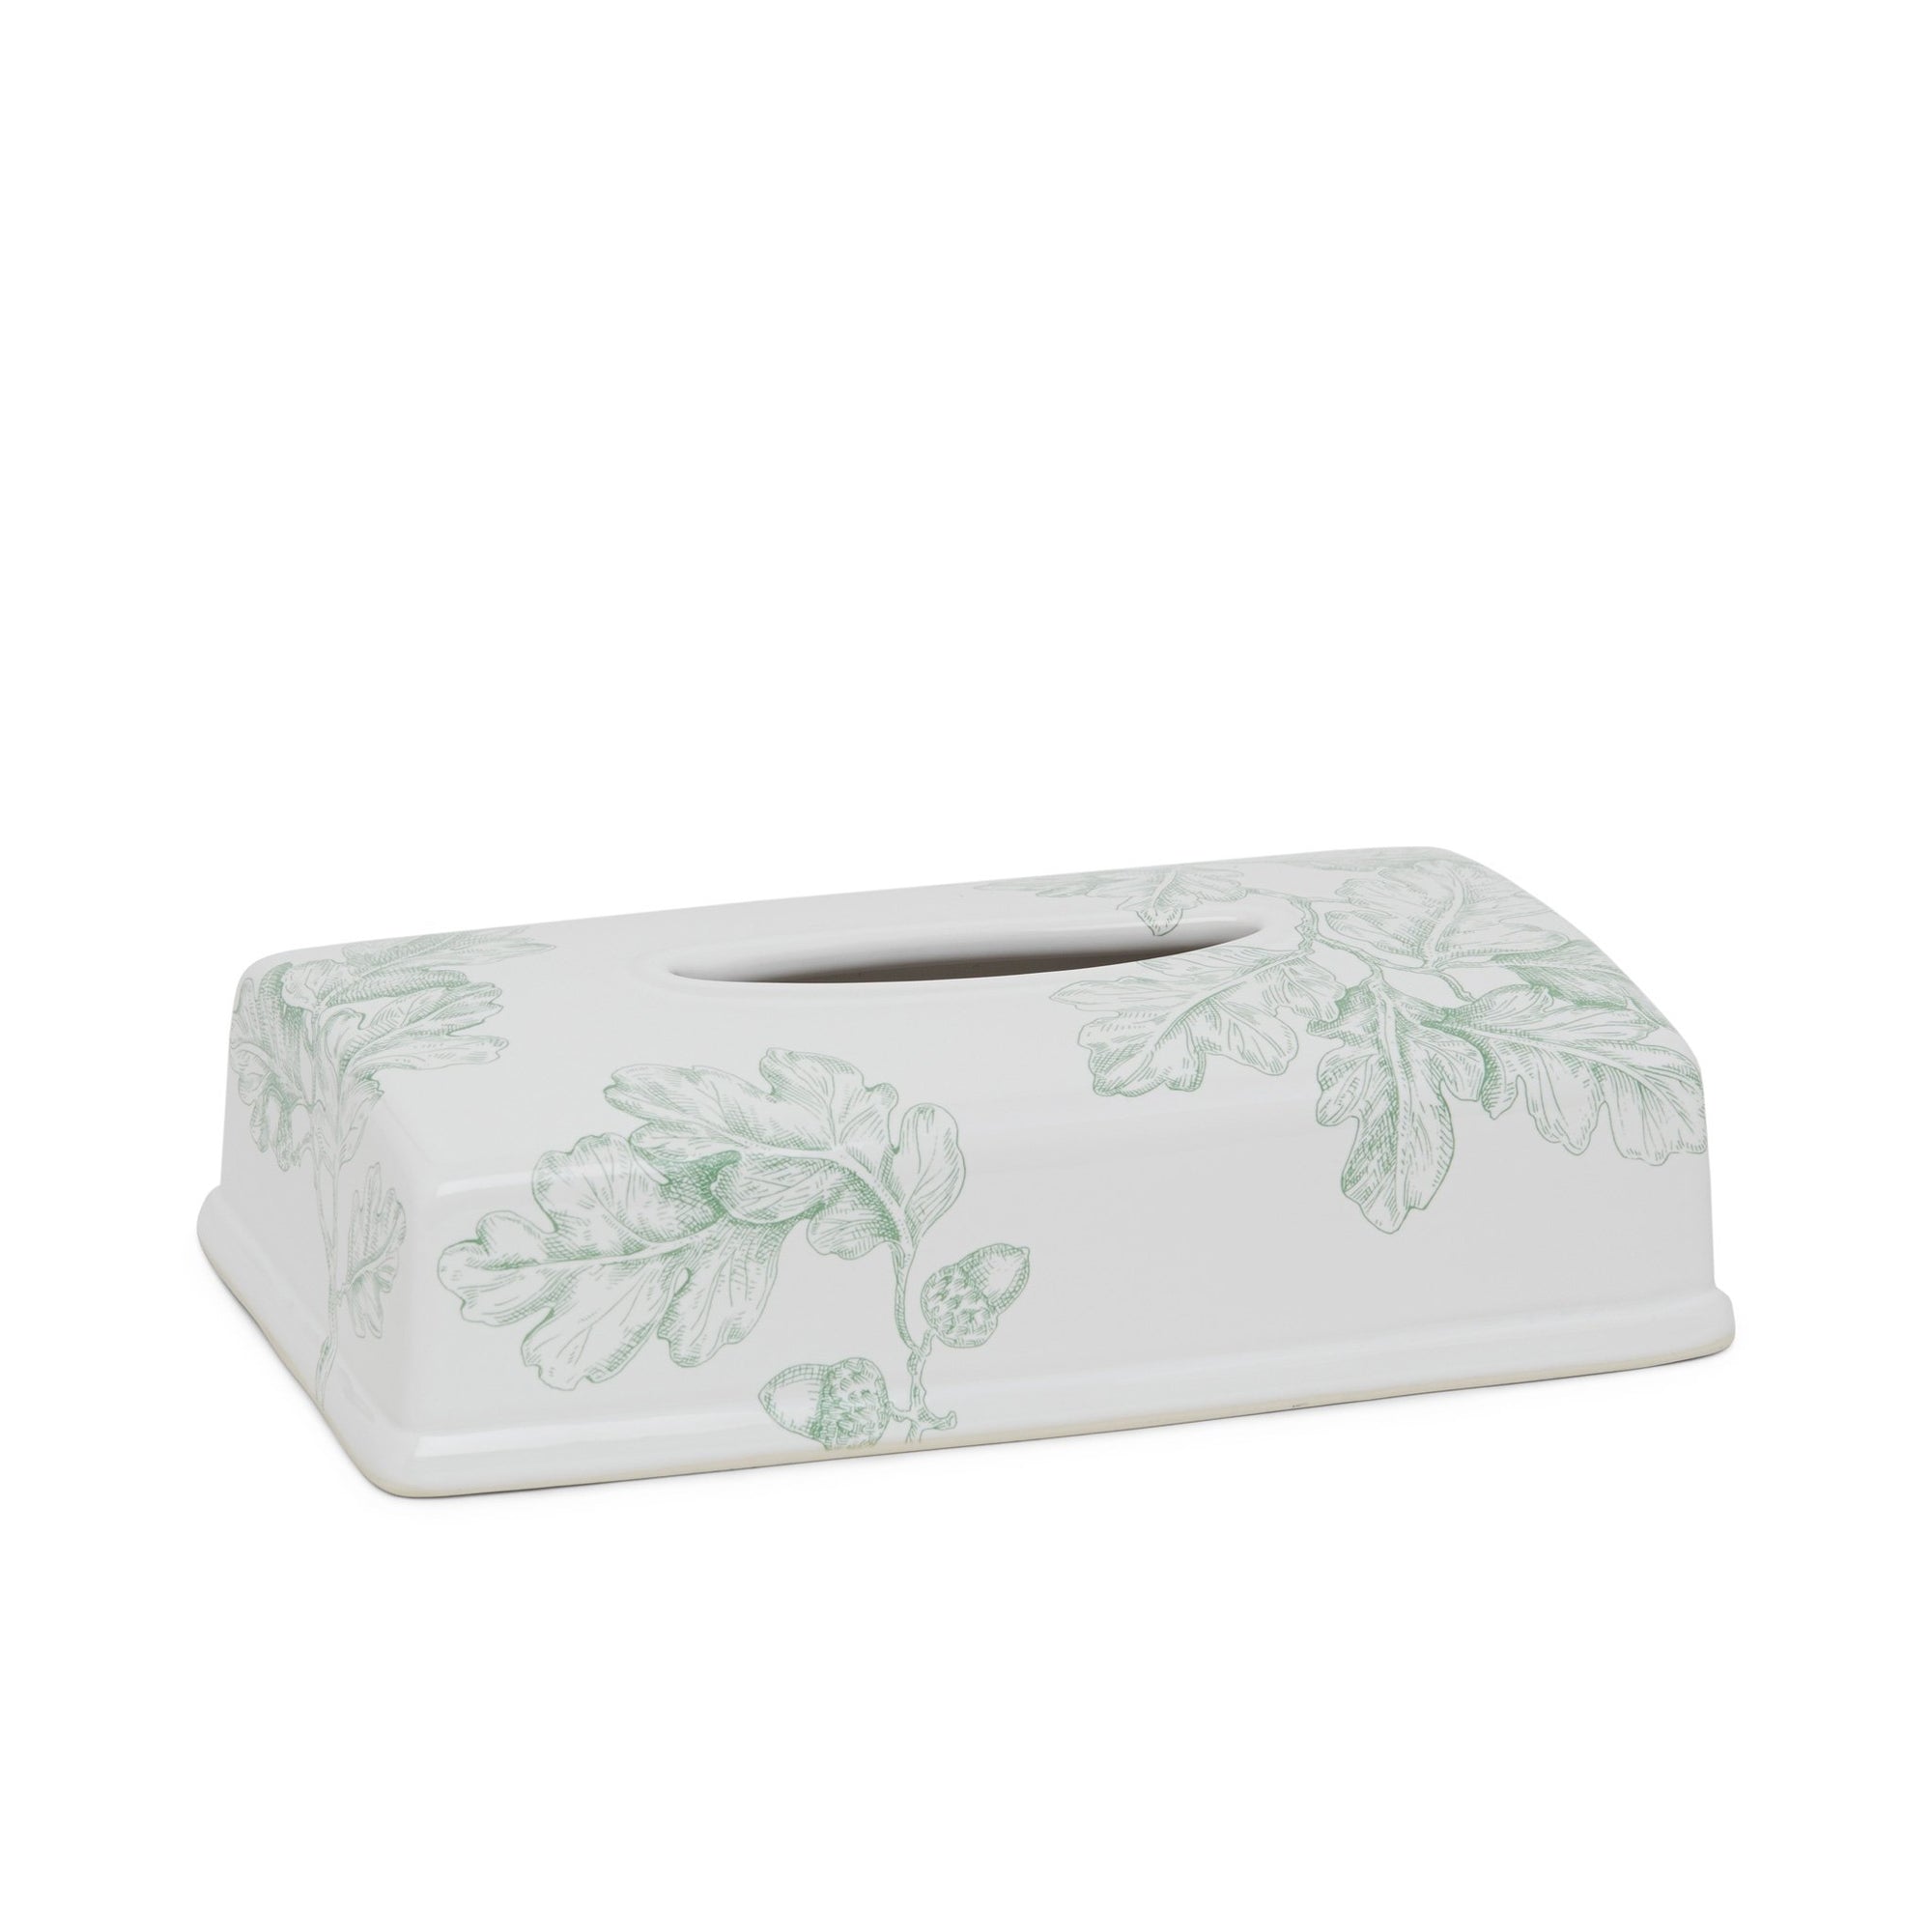 3400-99SG-WH Sherle Wagner International Ceramic Elongated Tissue Box Cover with Acorn & Oakleaf Sage on White